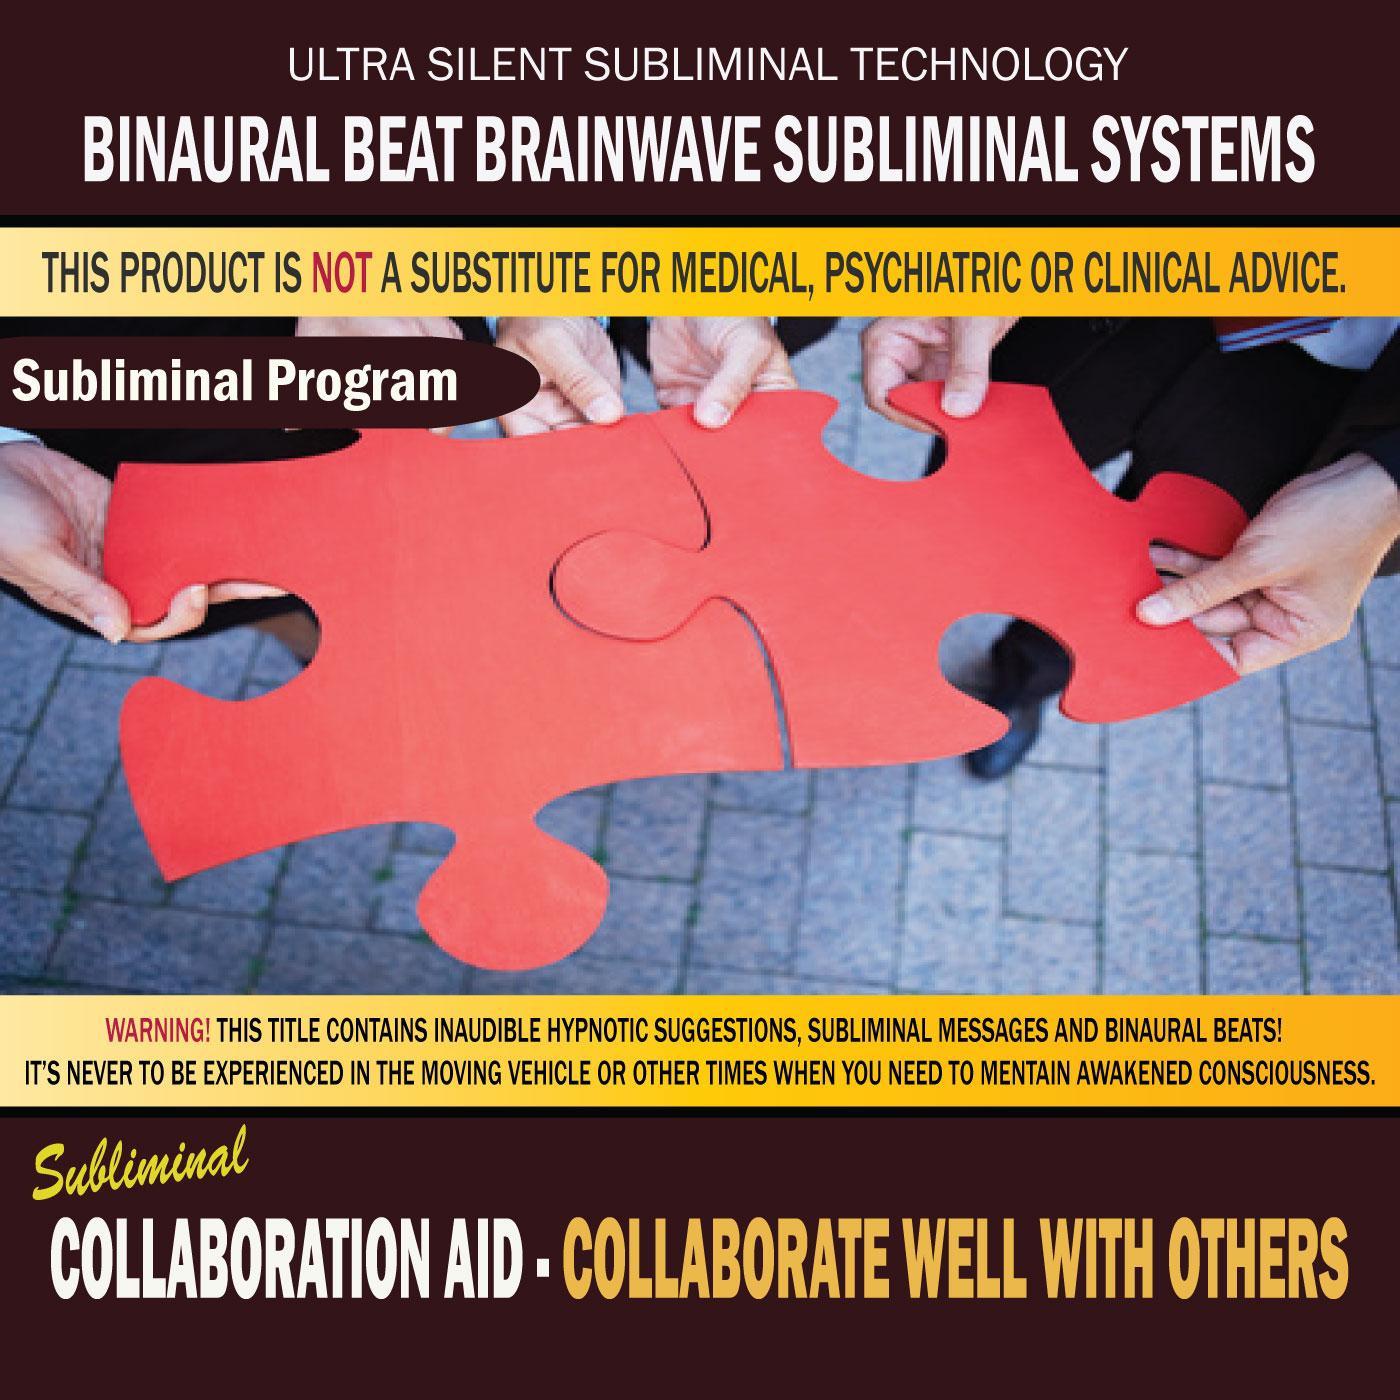 Collaboration Aid: Collaborate Well With Others